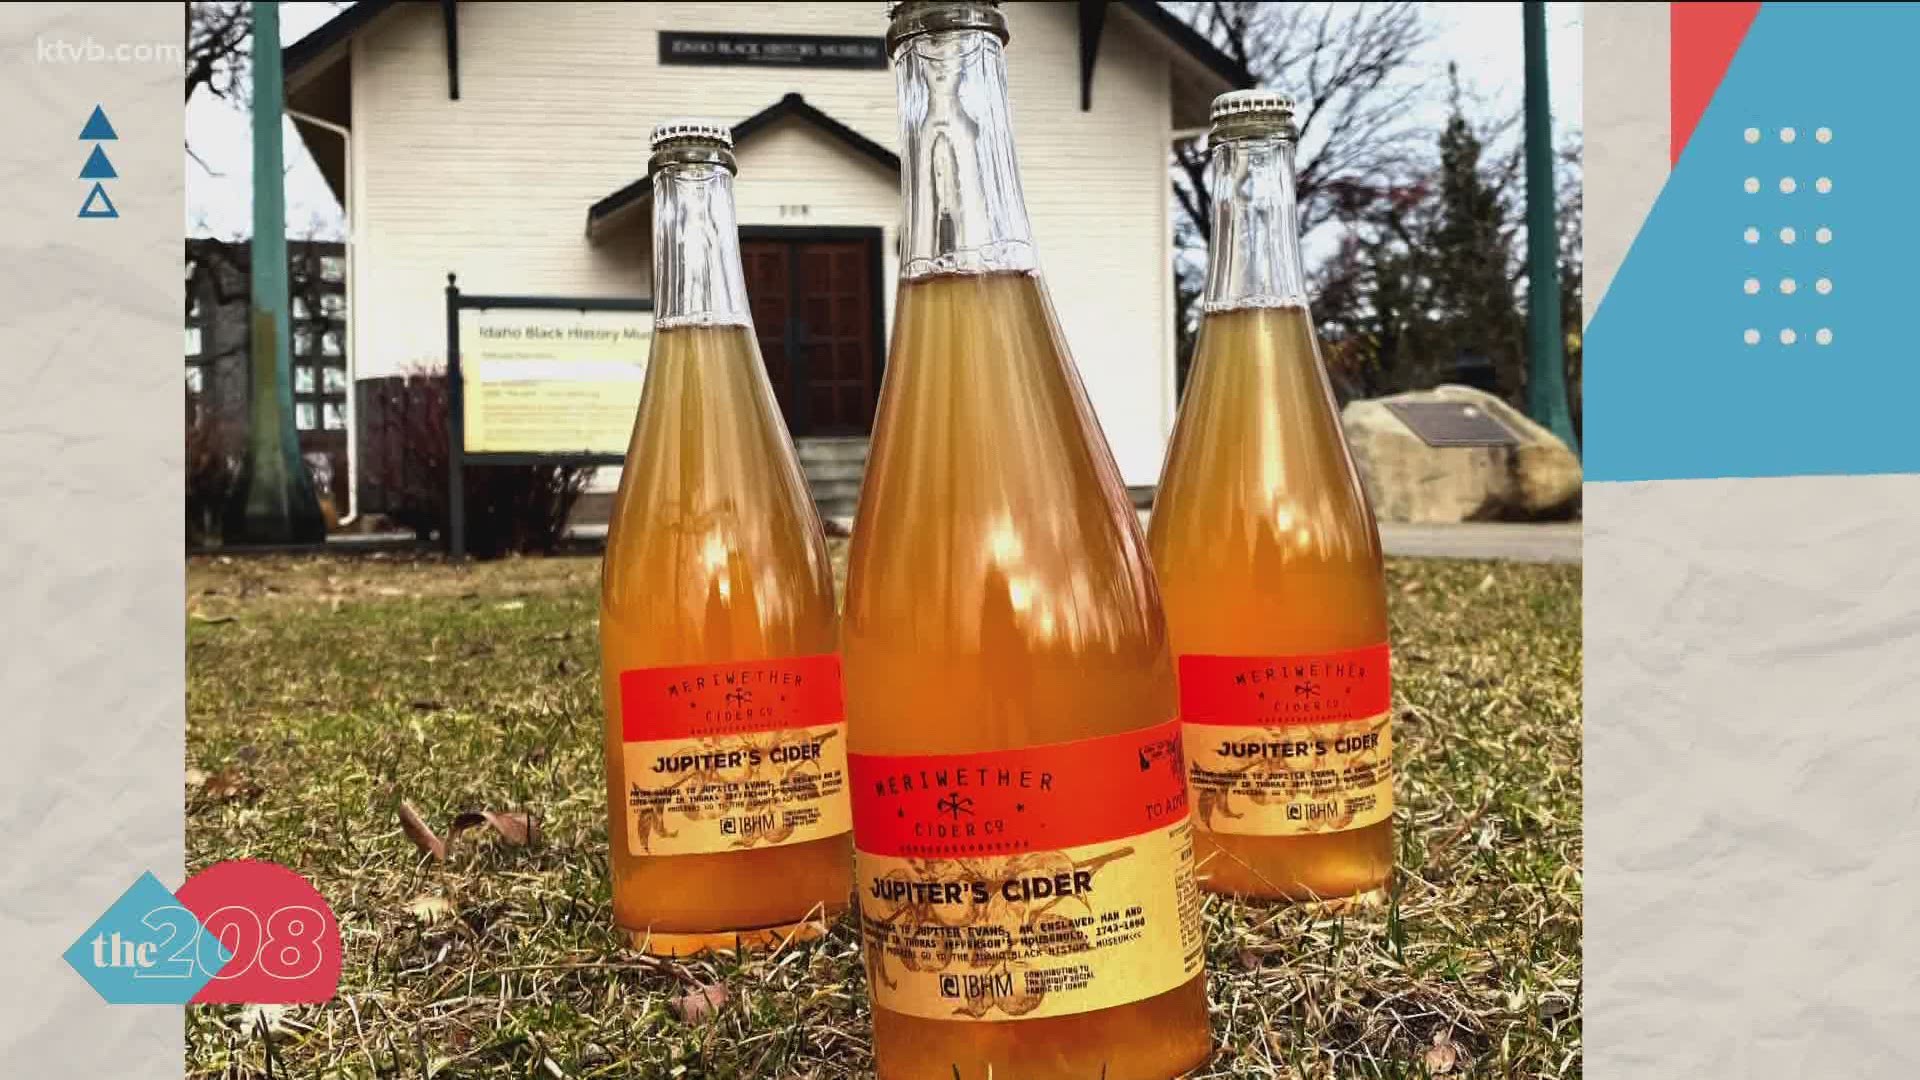 All of the proceeds from Jupiter's cider are being donated to the Black History Museum.